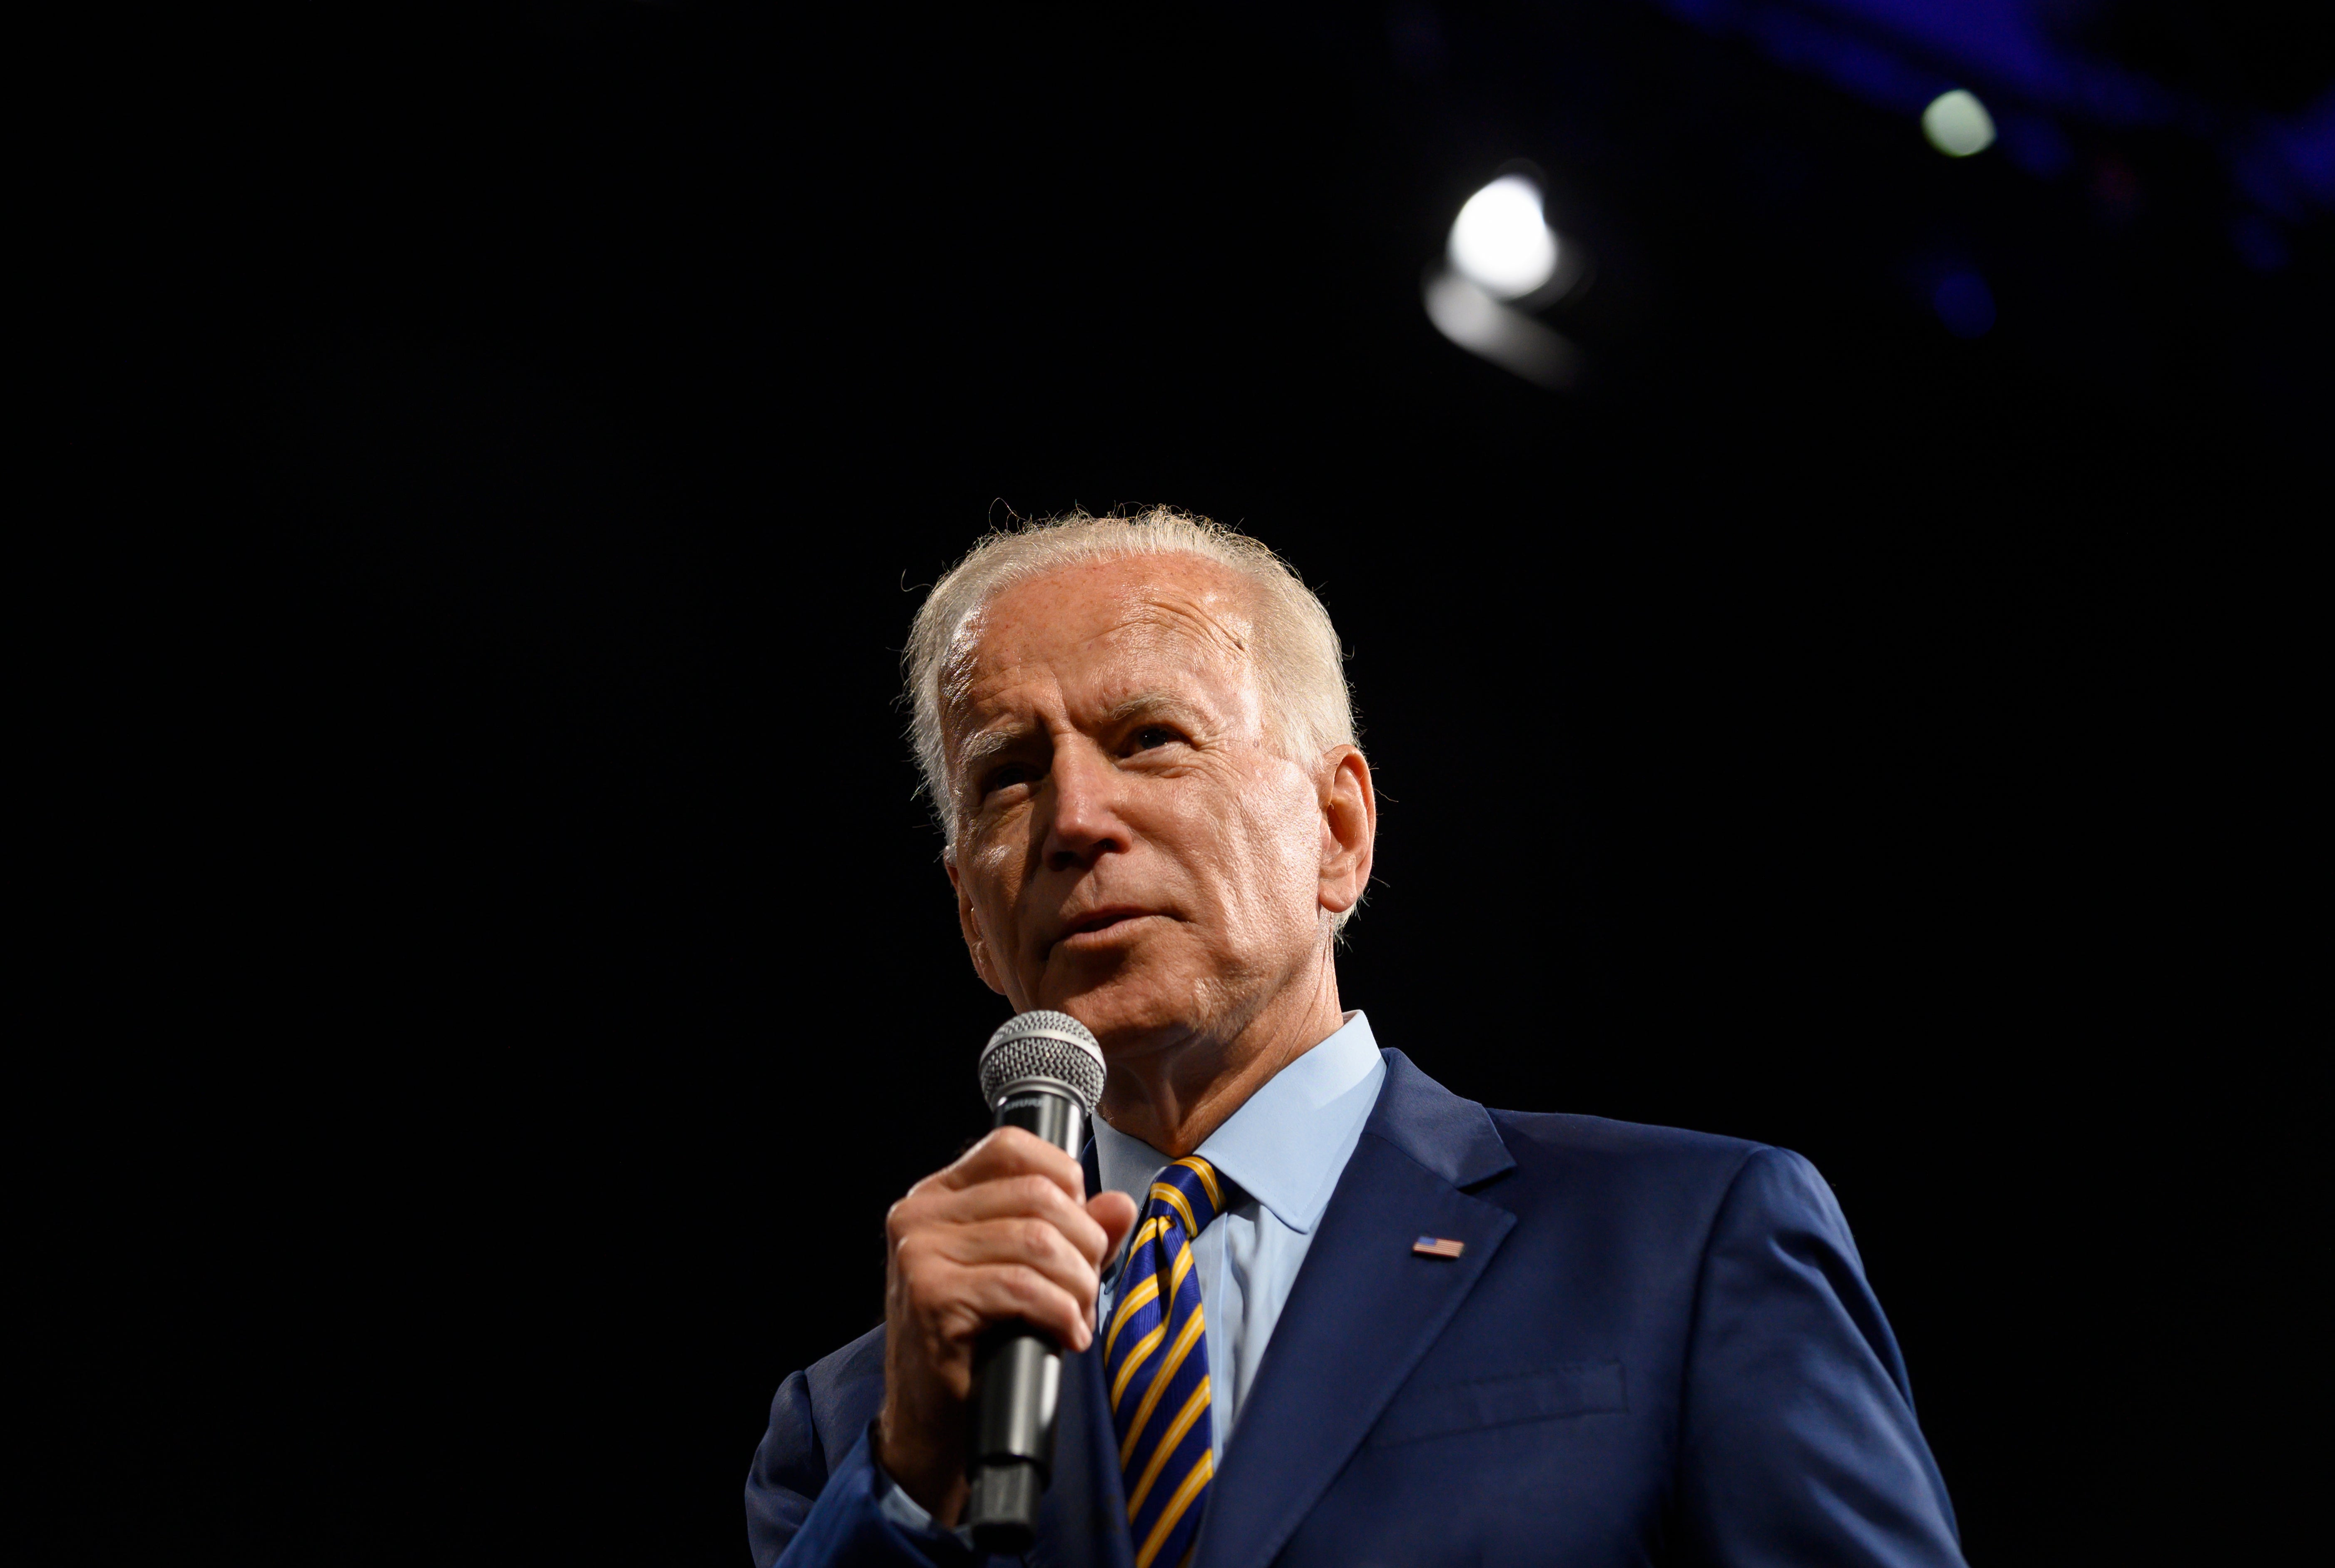 Biden Assures Supporters That He Is 'Confident We Can Win South Carolina'